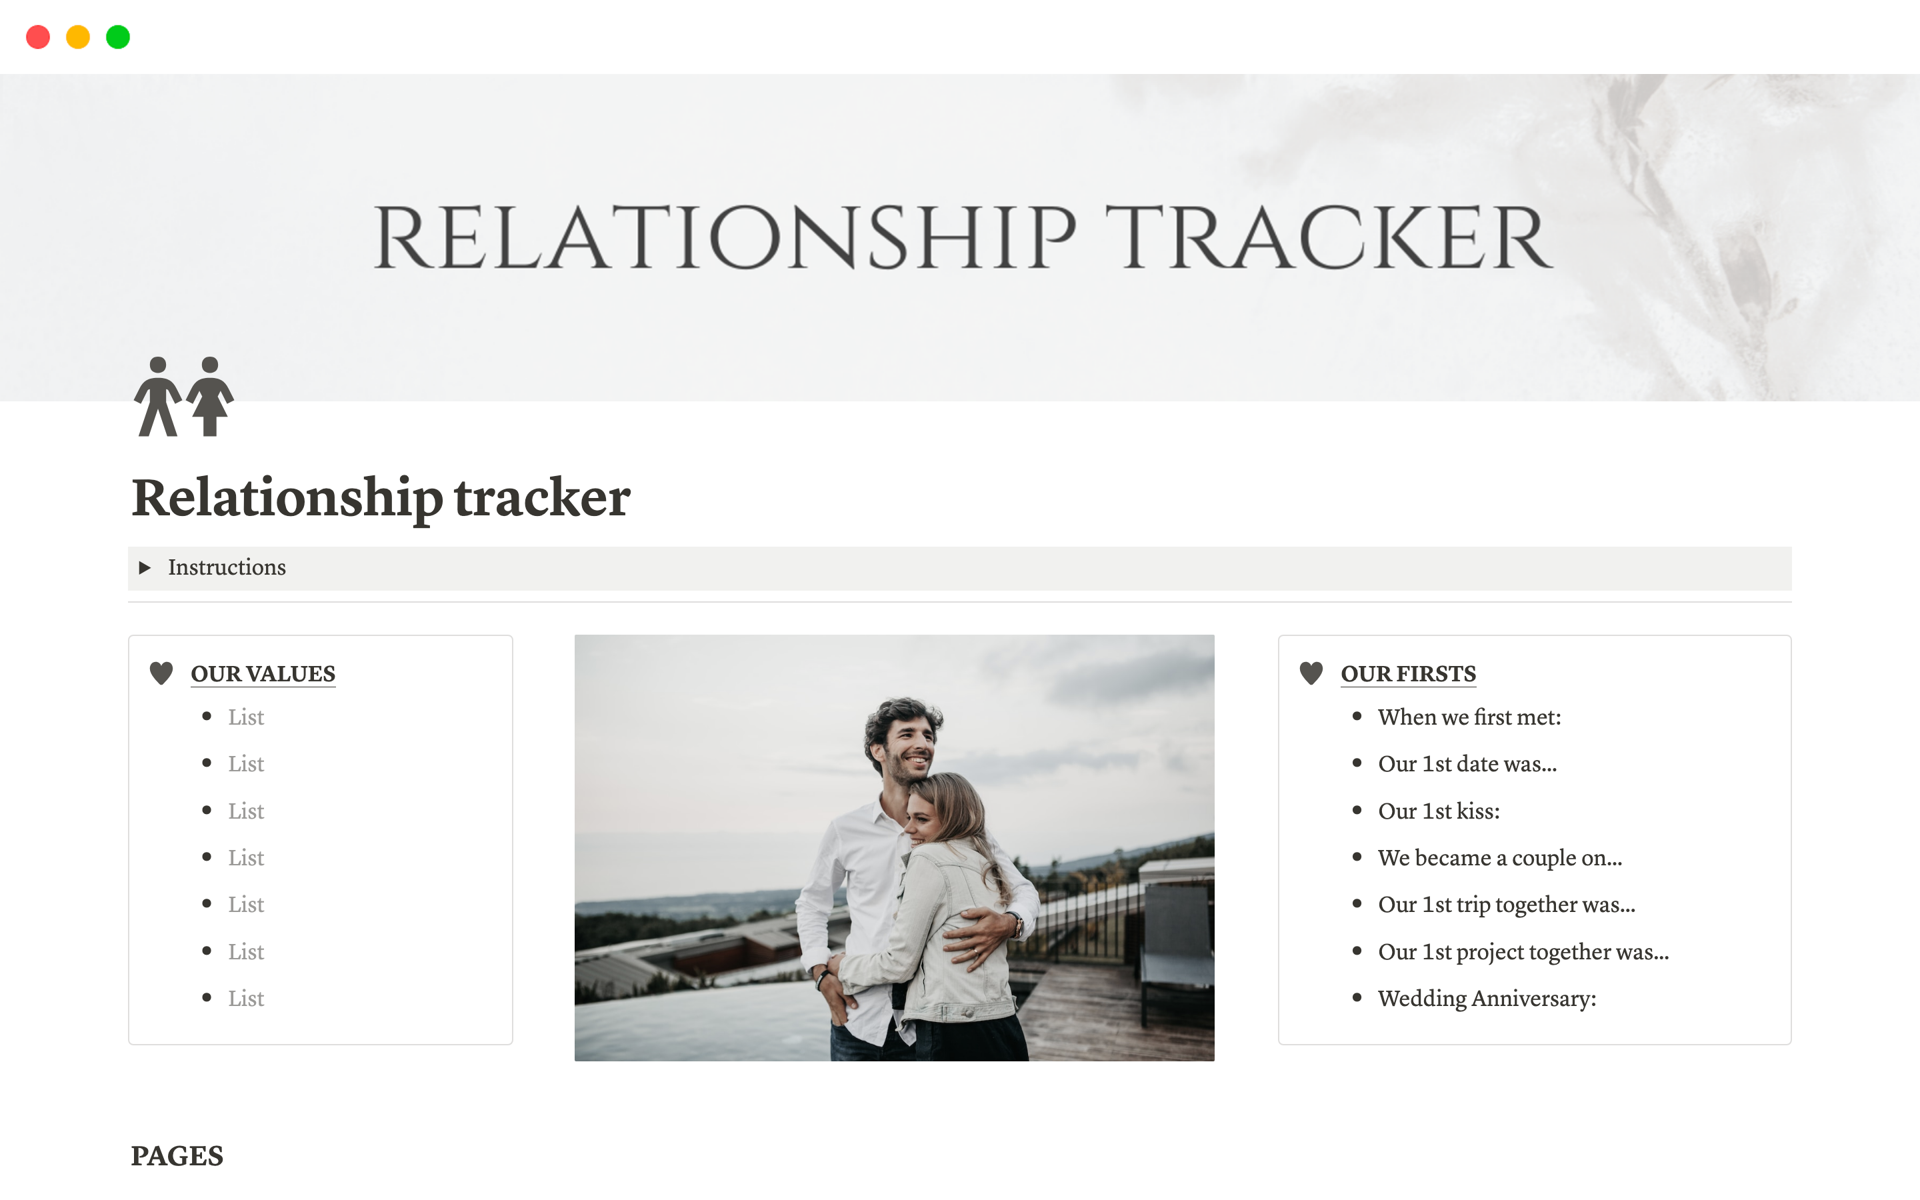 This Relationship tracker is designed to help you track and improve your relationship health.